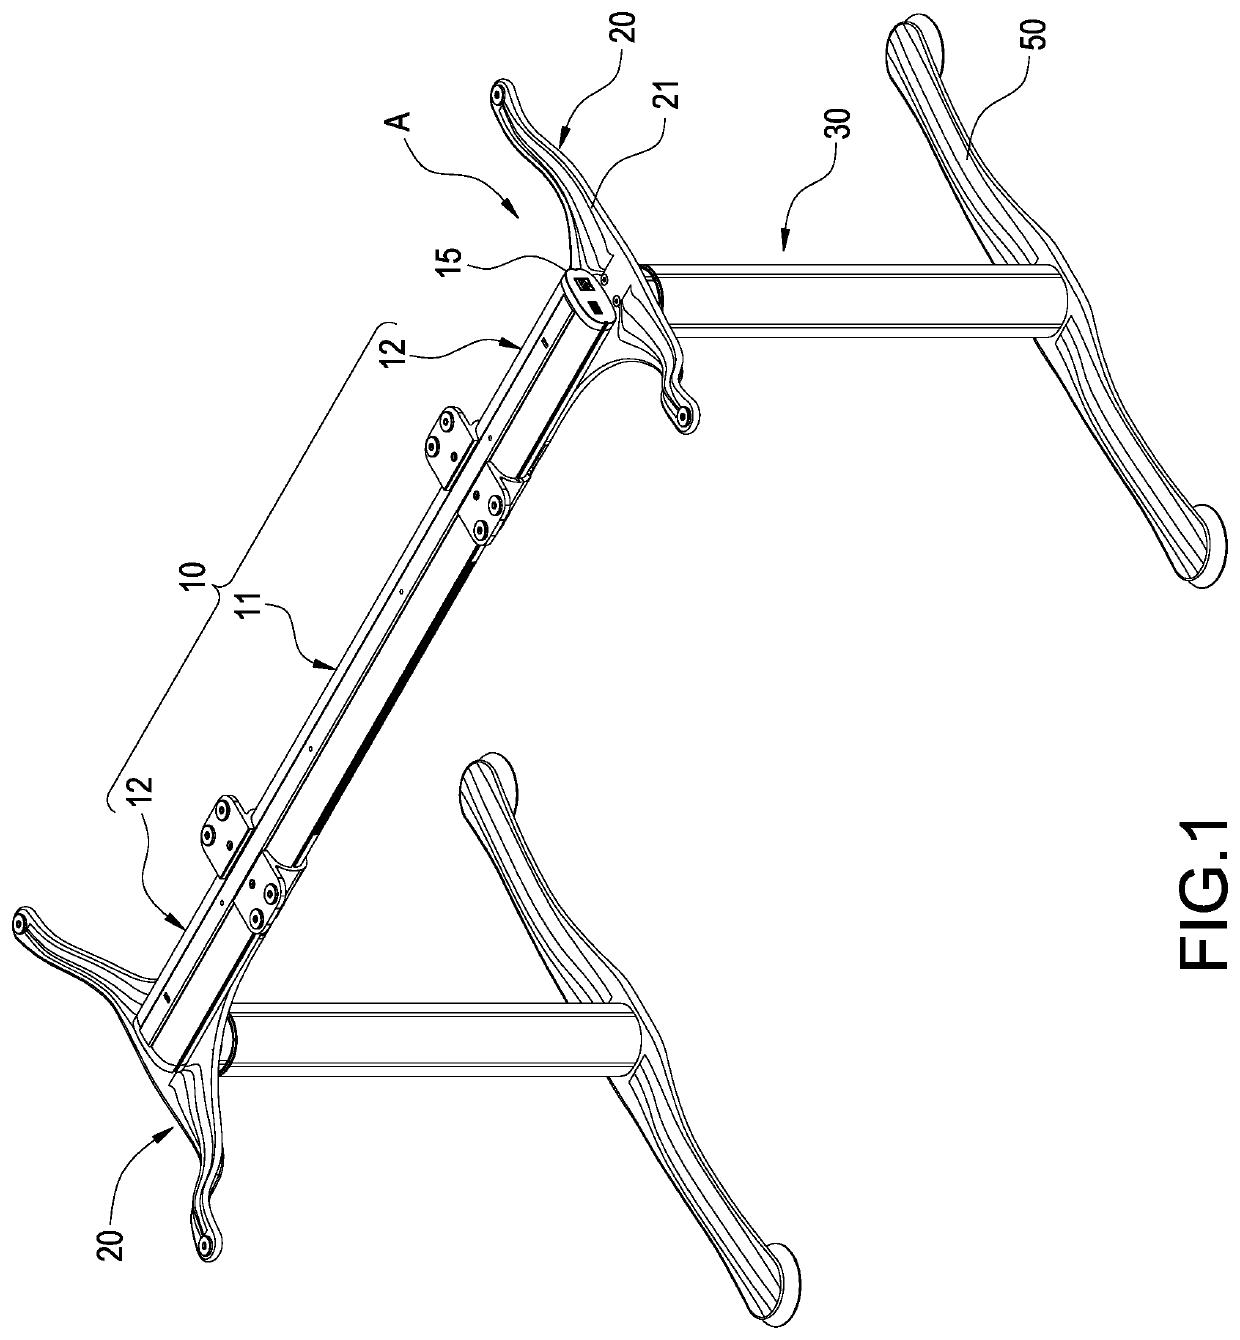 Electric table stand for simple assembly and adjustment